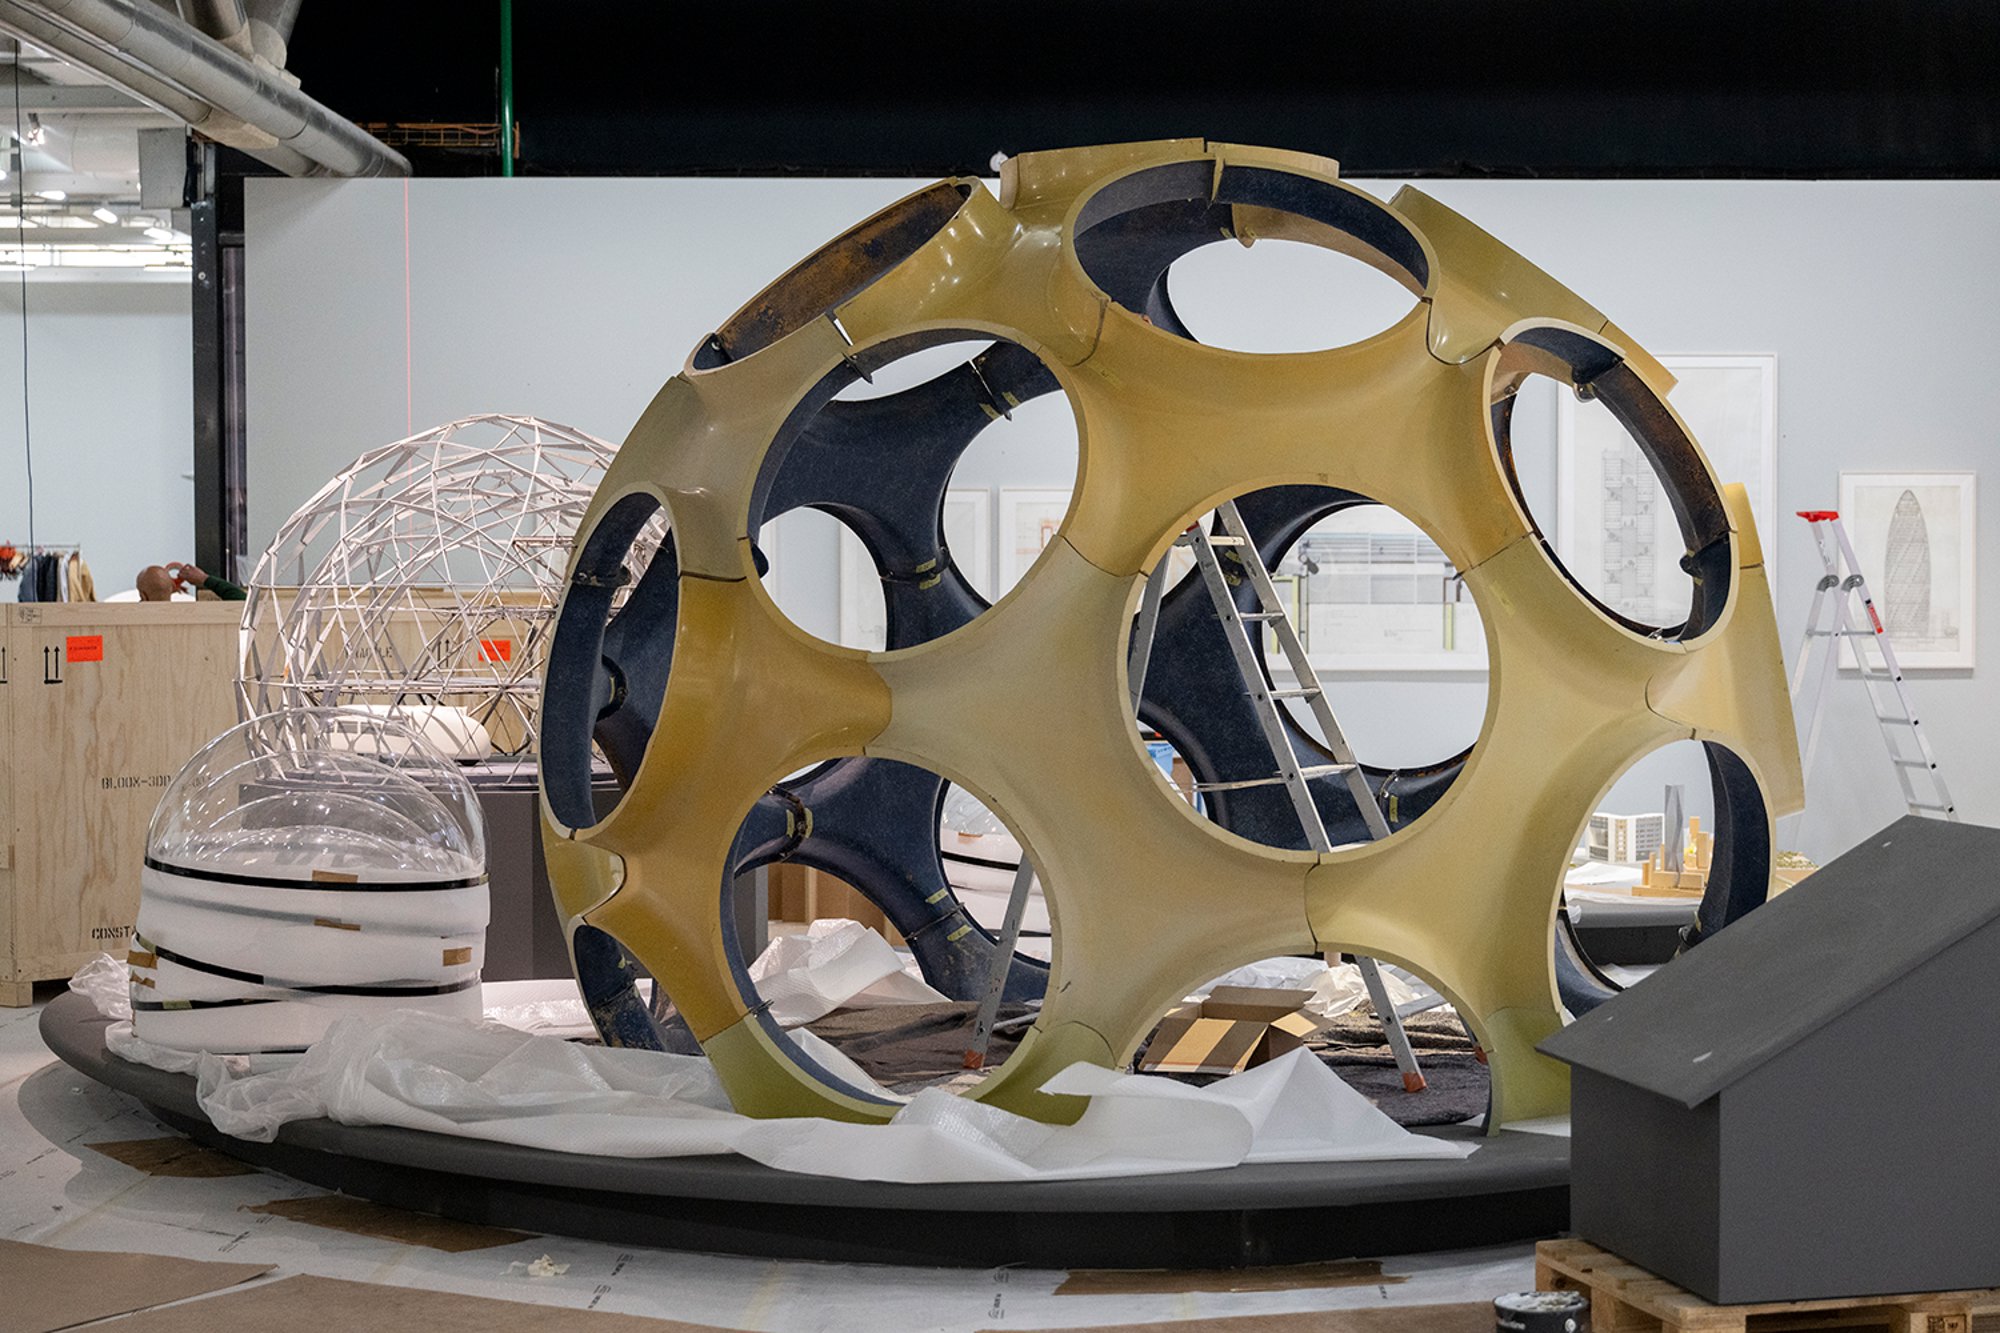 Building Buckminster Fuller's 12-foot Fly's Eye Dome, which is made from Fibreglass. Norman Foster was working with Buckminster Fuller and his collaborator John Warren at the time they produced this 12-foot prototype, which has since been bought from the Fuller Estate for The Norman Foster Foundation.